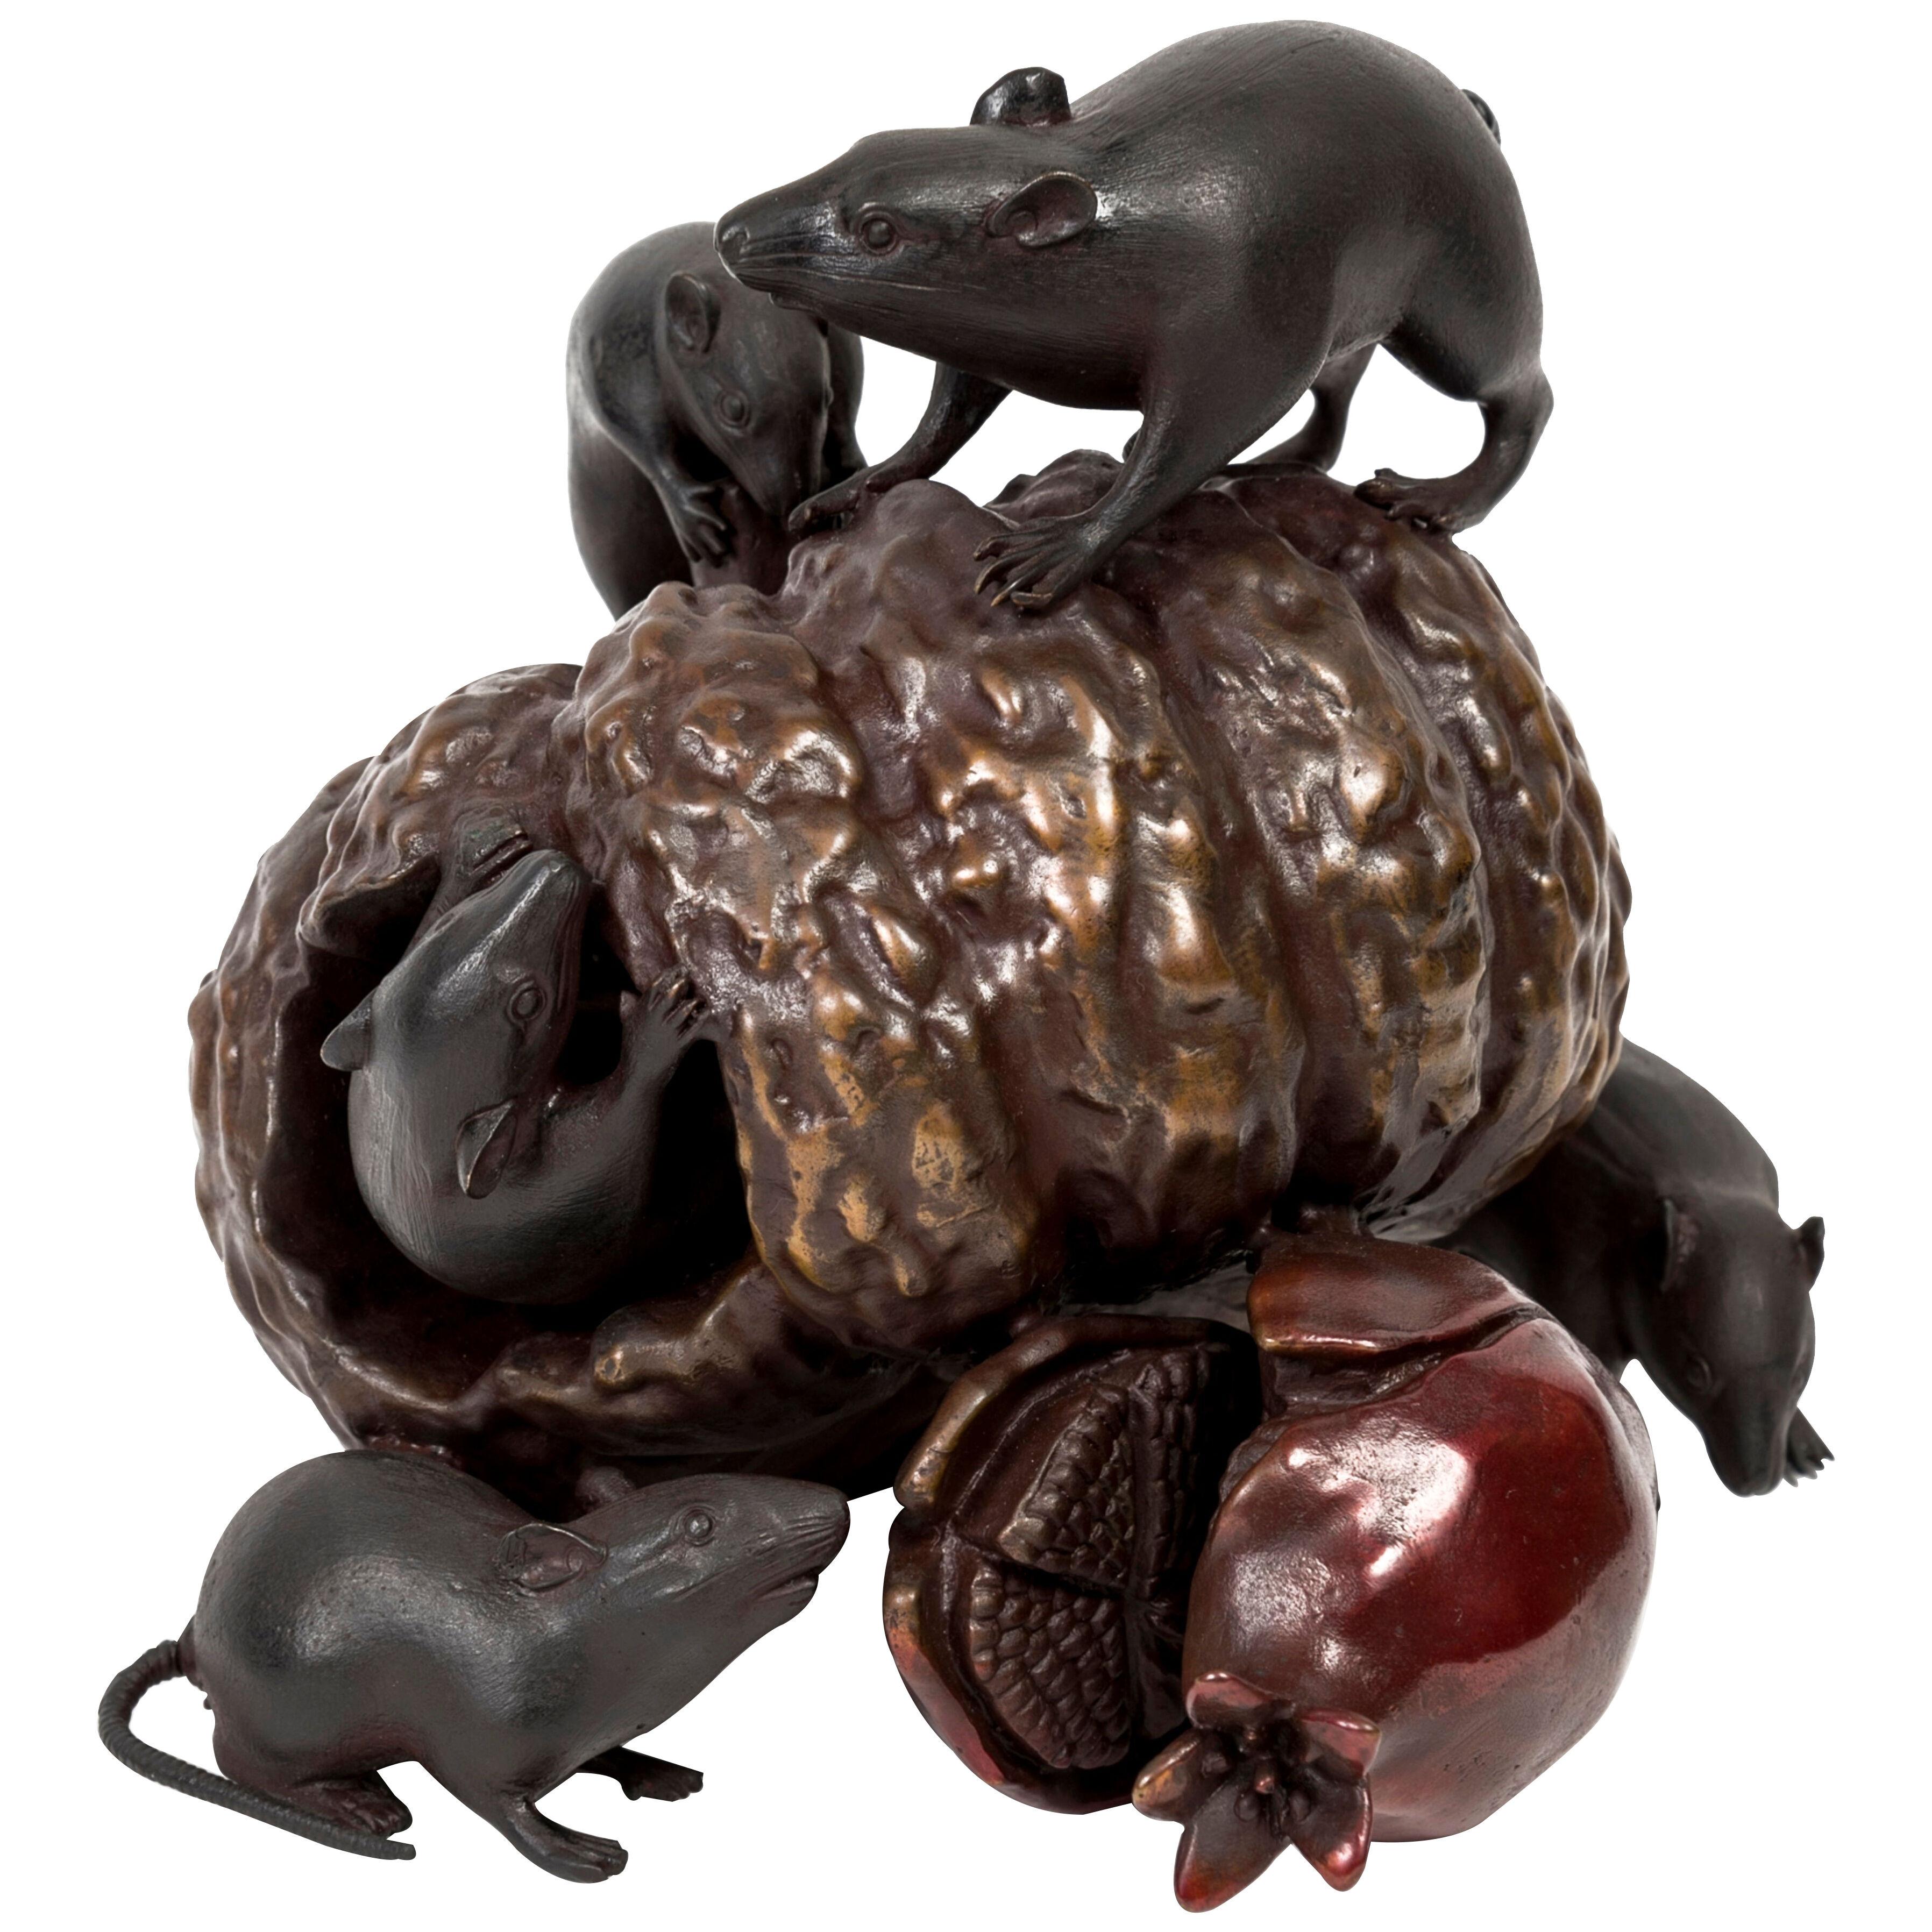 Japanese bronze mice and vegetables